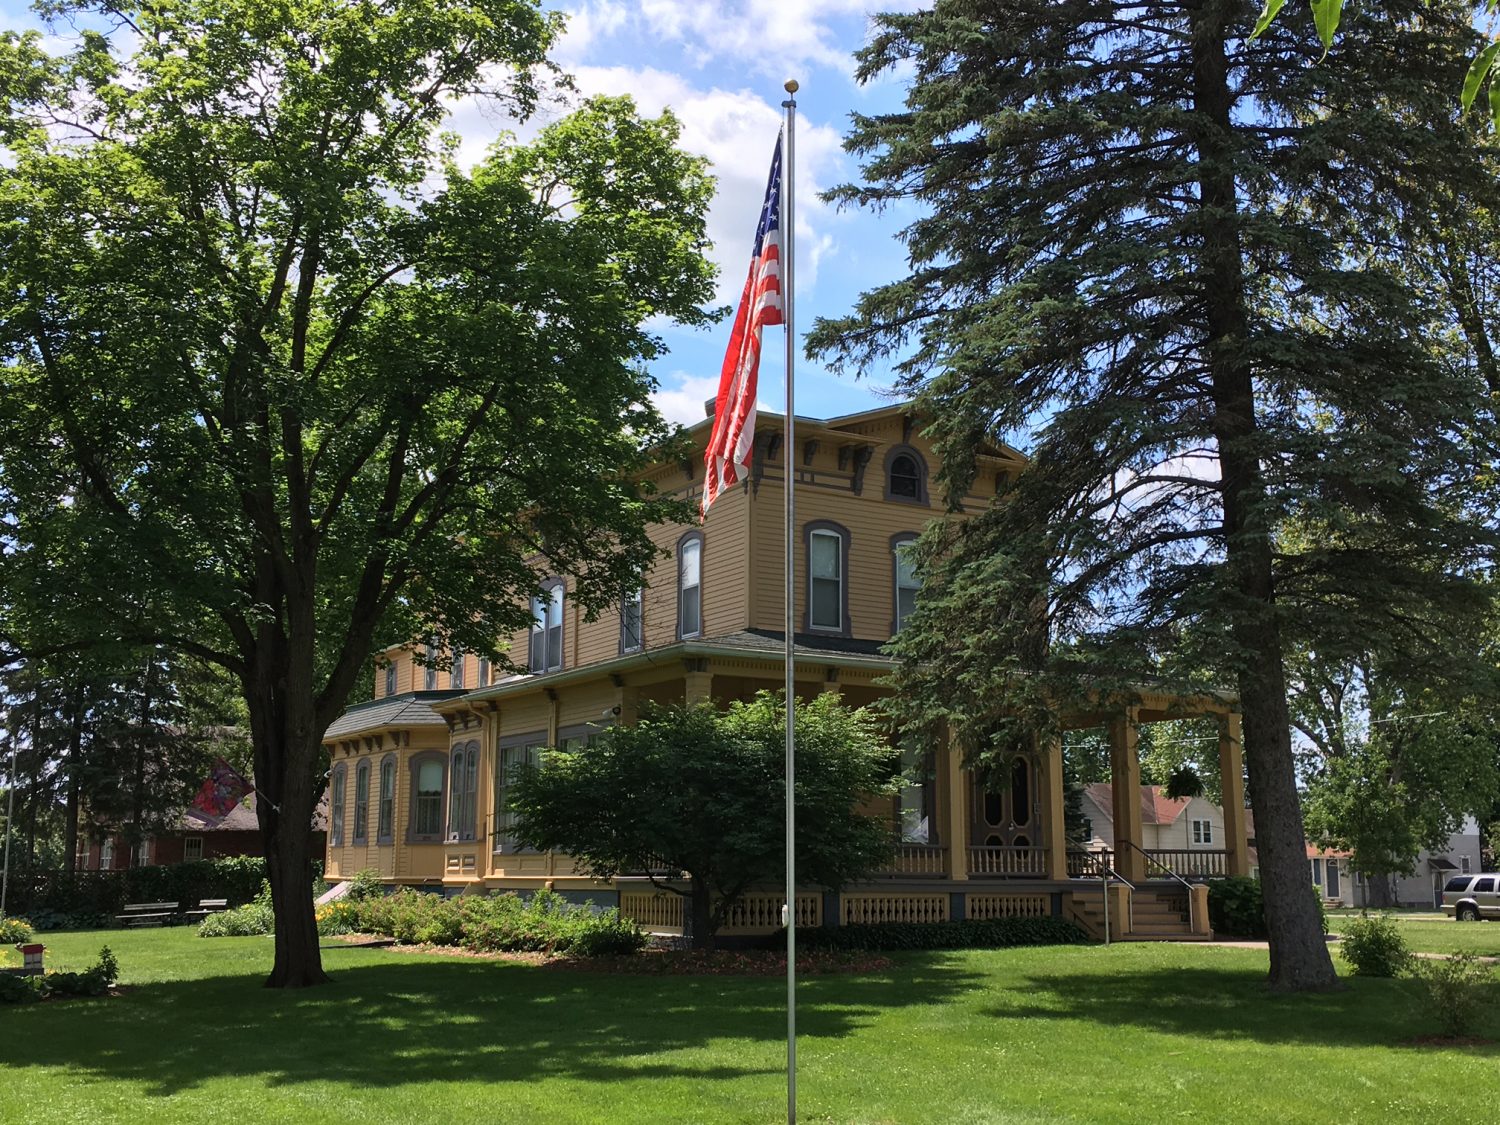 Following the Great Marshfield Fire of June 27, 1887, the citys sense of hope was strengthened when the stars and stripes rose up the Upham Company flagpole.